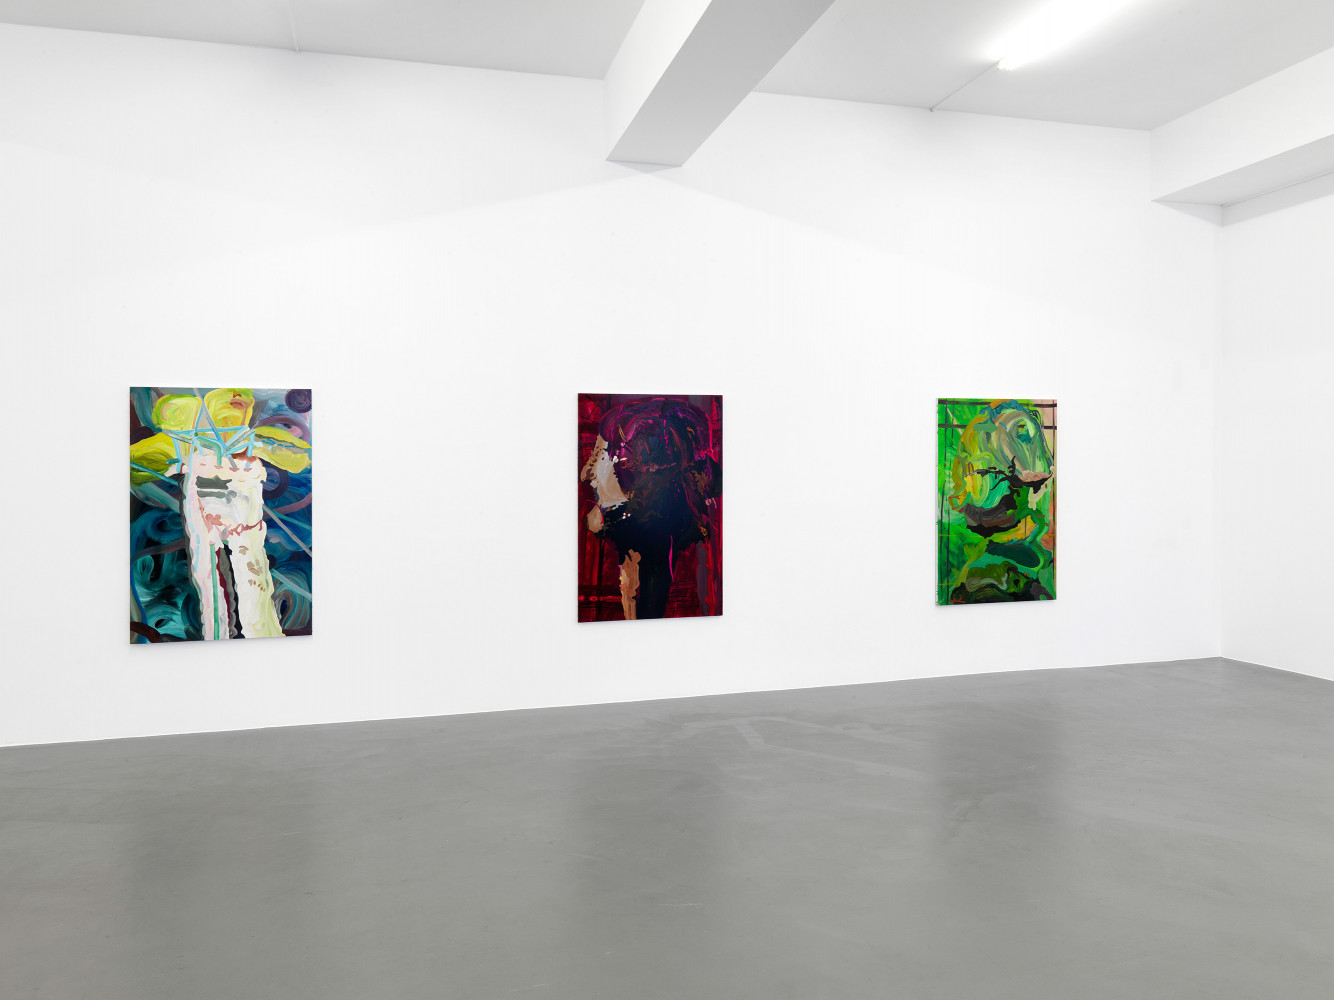 Clare Woods, Installation view, 2012